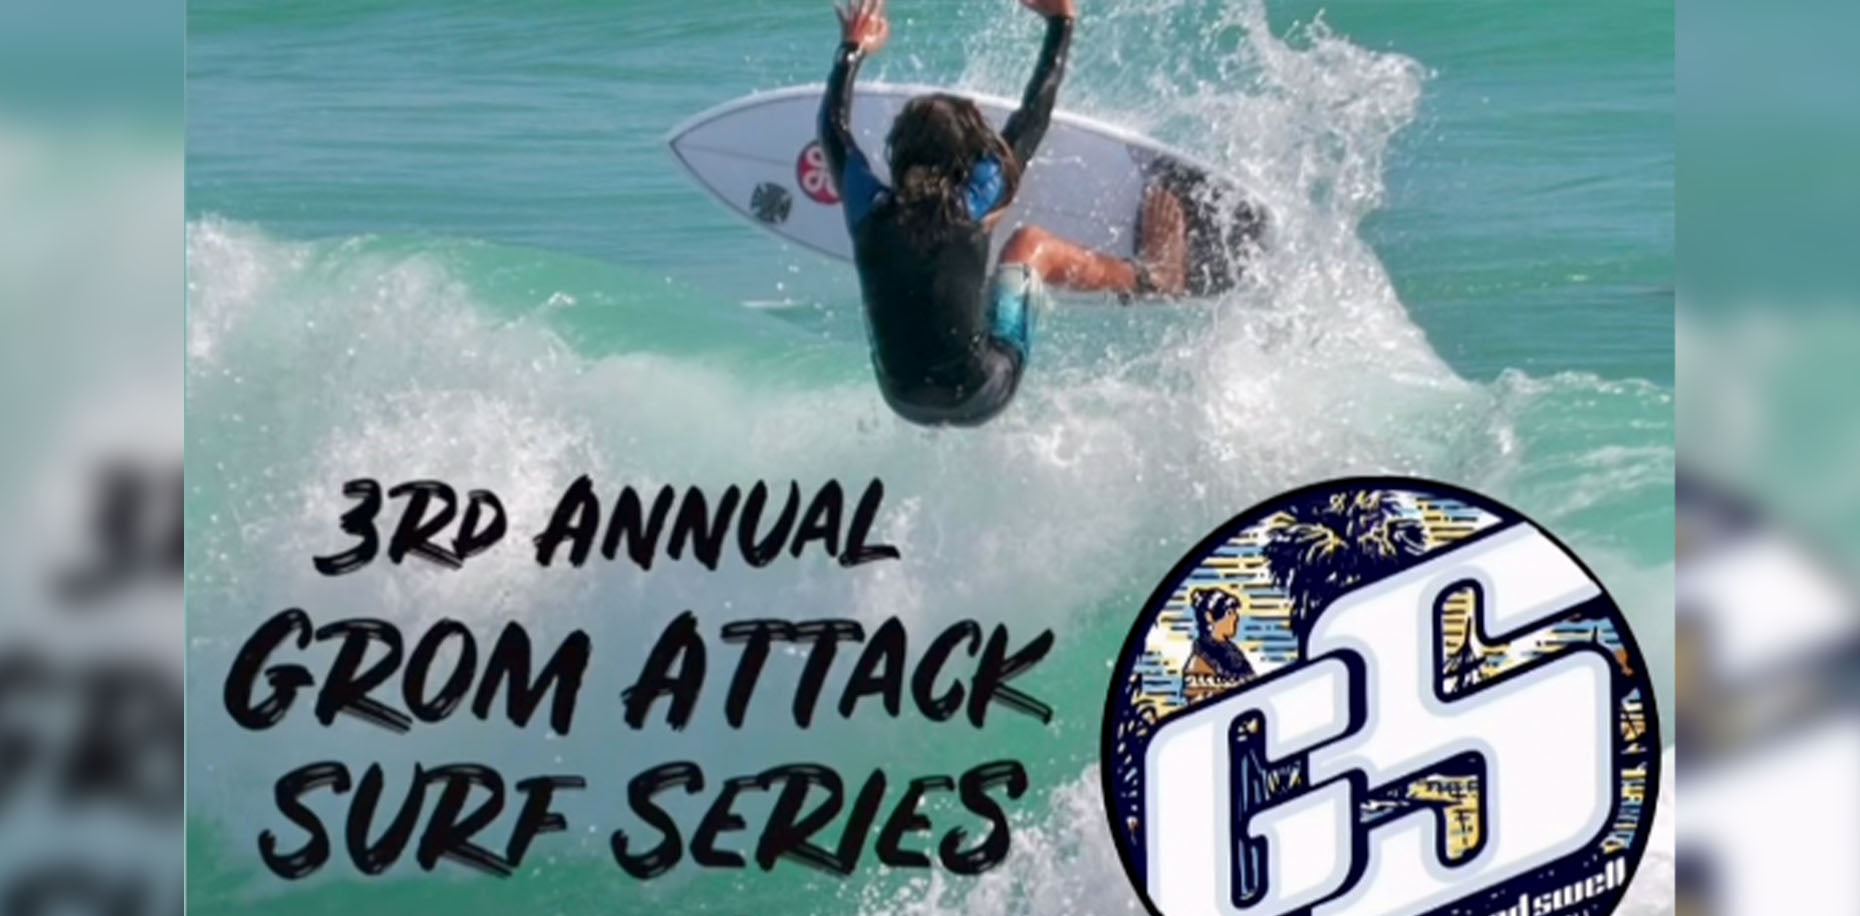 Grom Attack Surf Series: April 27-28th